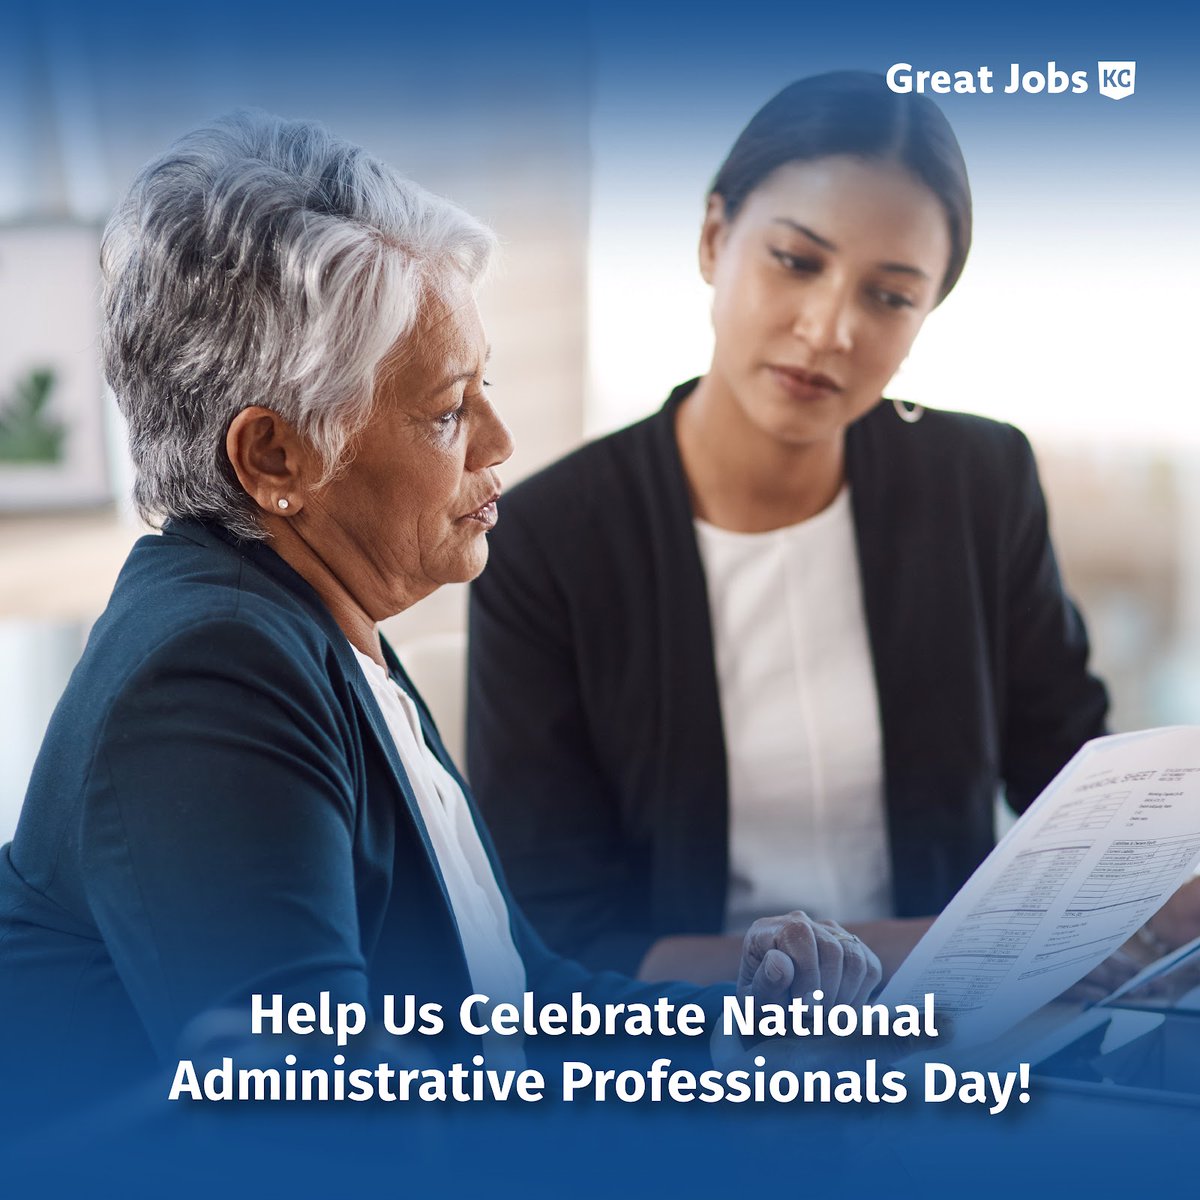 Happy National Administrative Professionals Day! Thank you to those who keep our workplaces running smoothly daily!